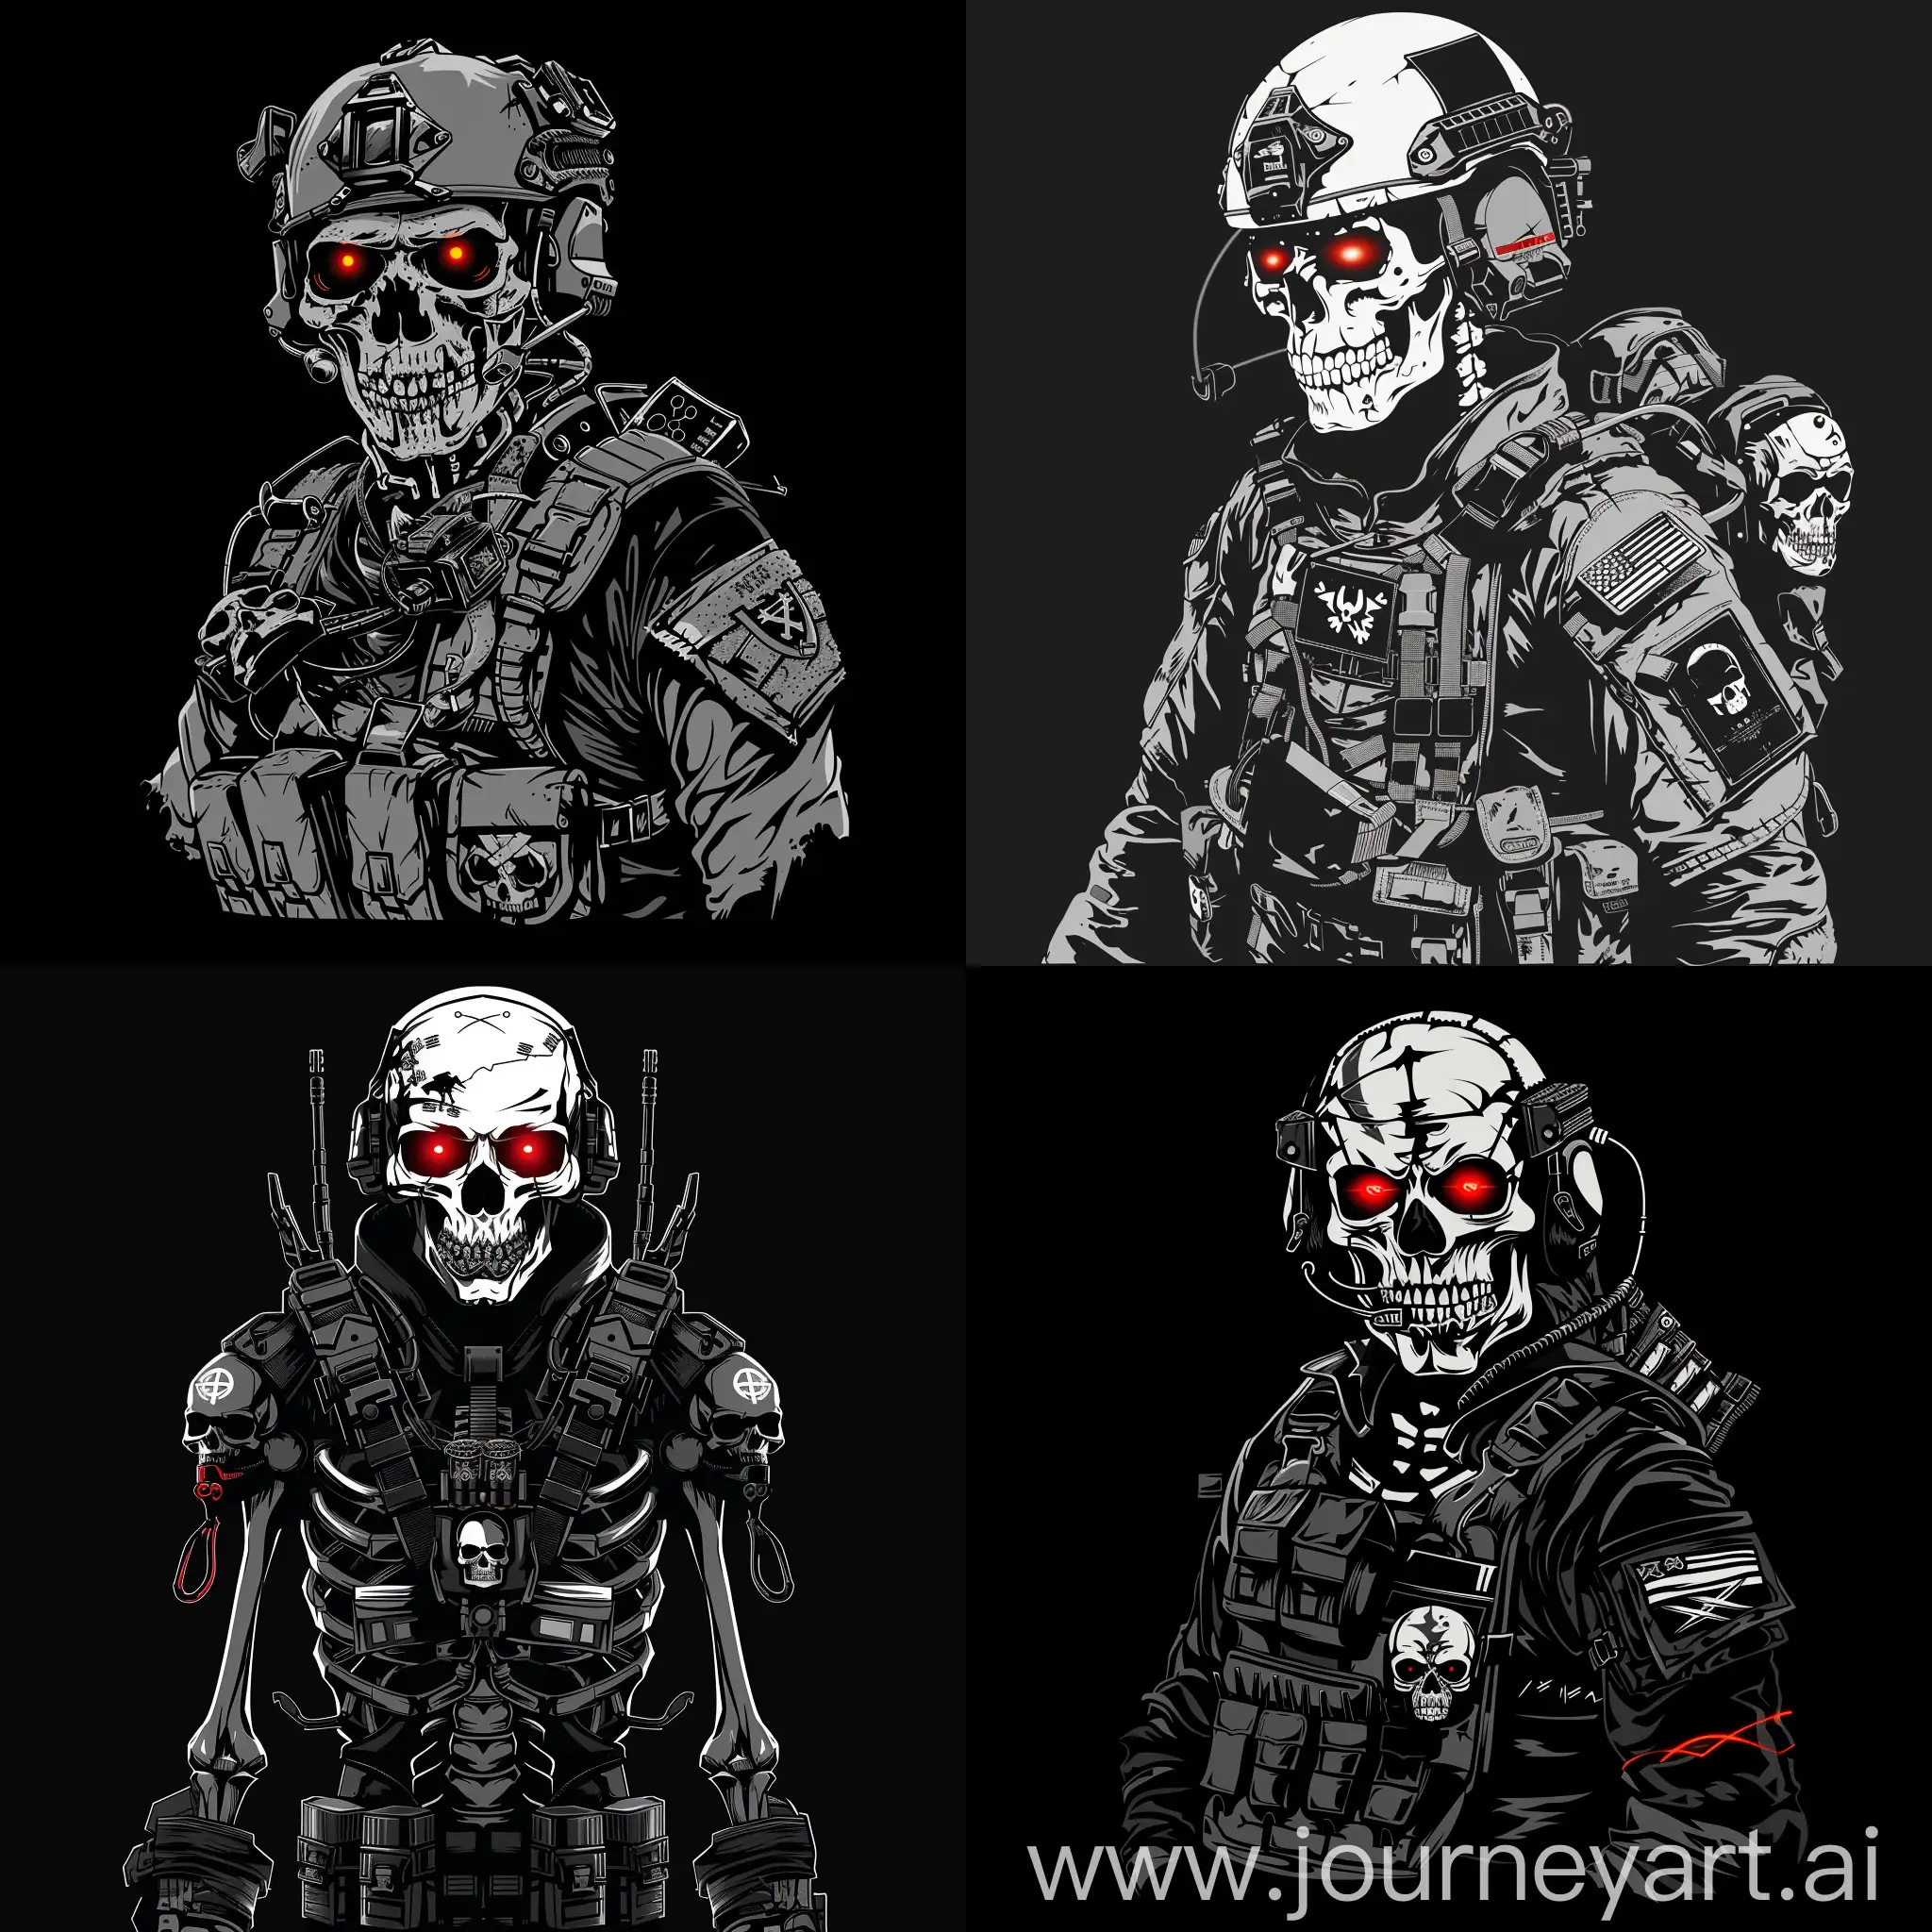 Modern-Military-Undead-Soldiers-with-Glowing-Red-Eyes-on-Black-Background